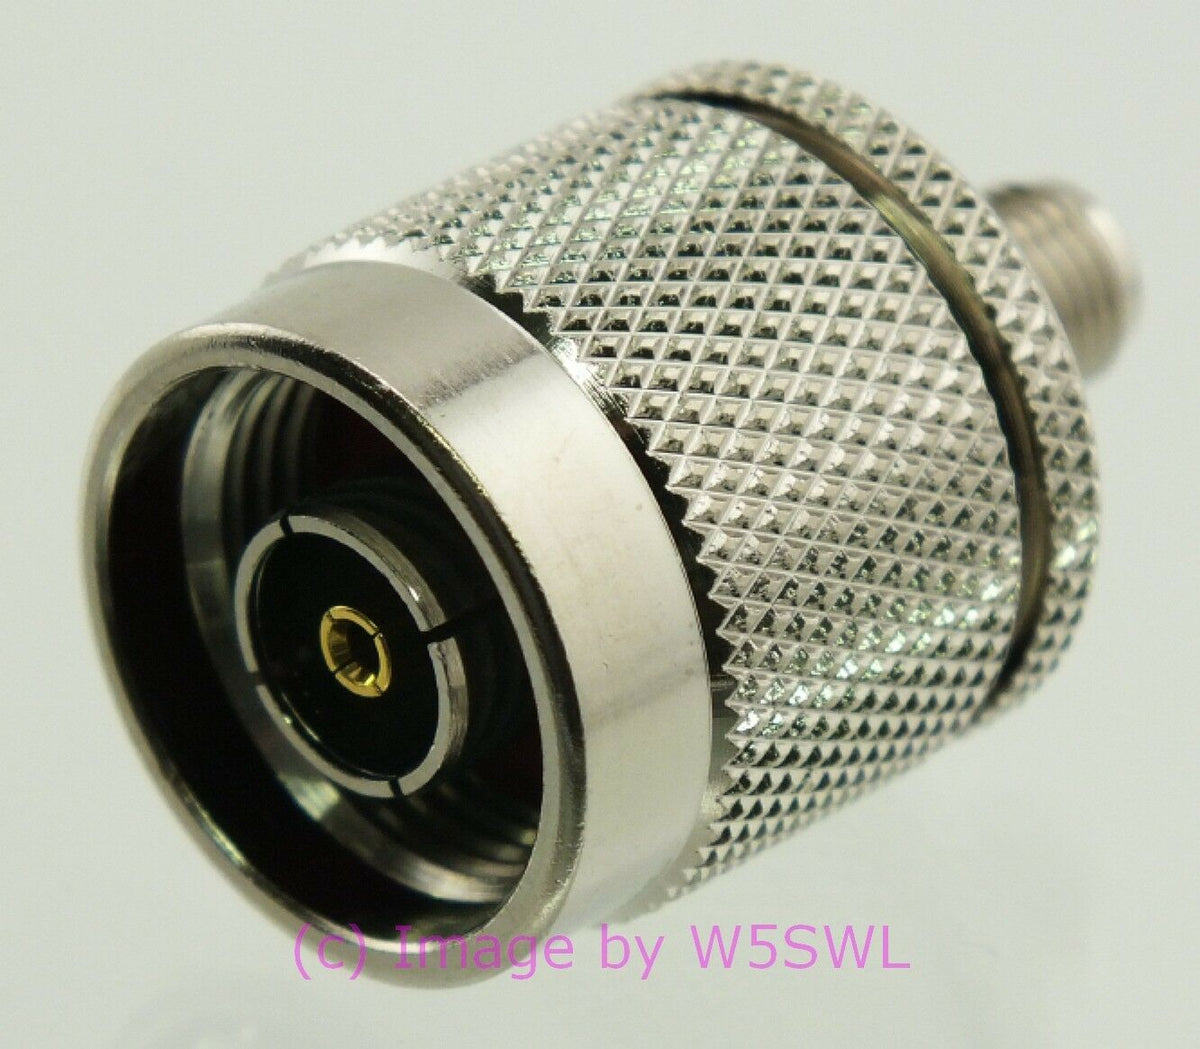 W5SWL RP N Male to RP SMA Female Coax Connector Adapter - Dave's Hobby Shop by W5SWL